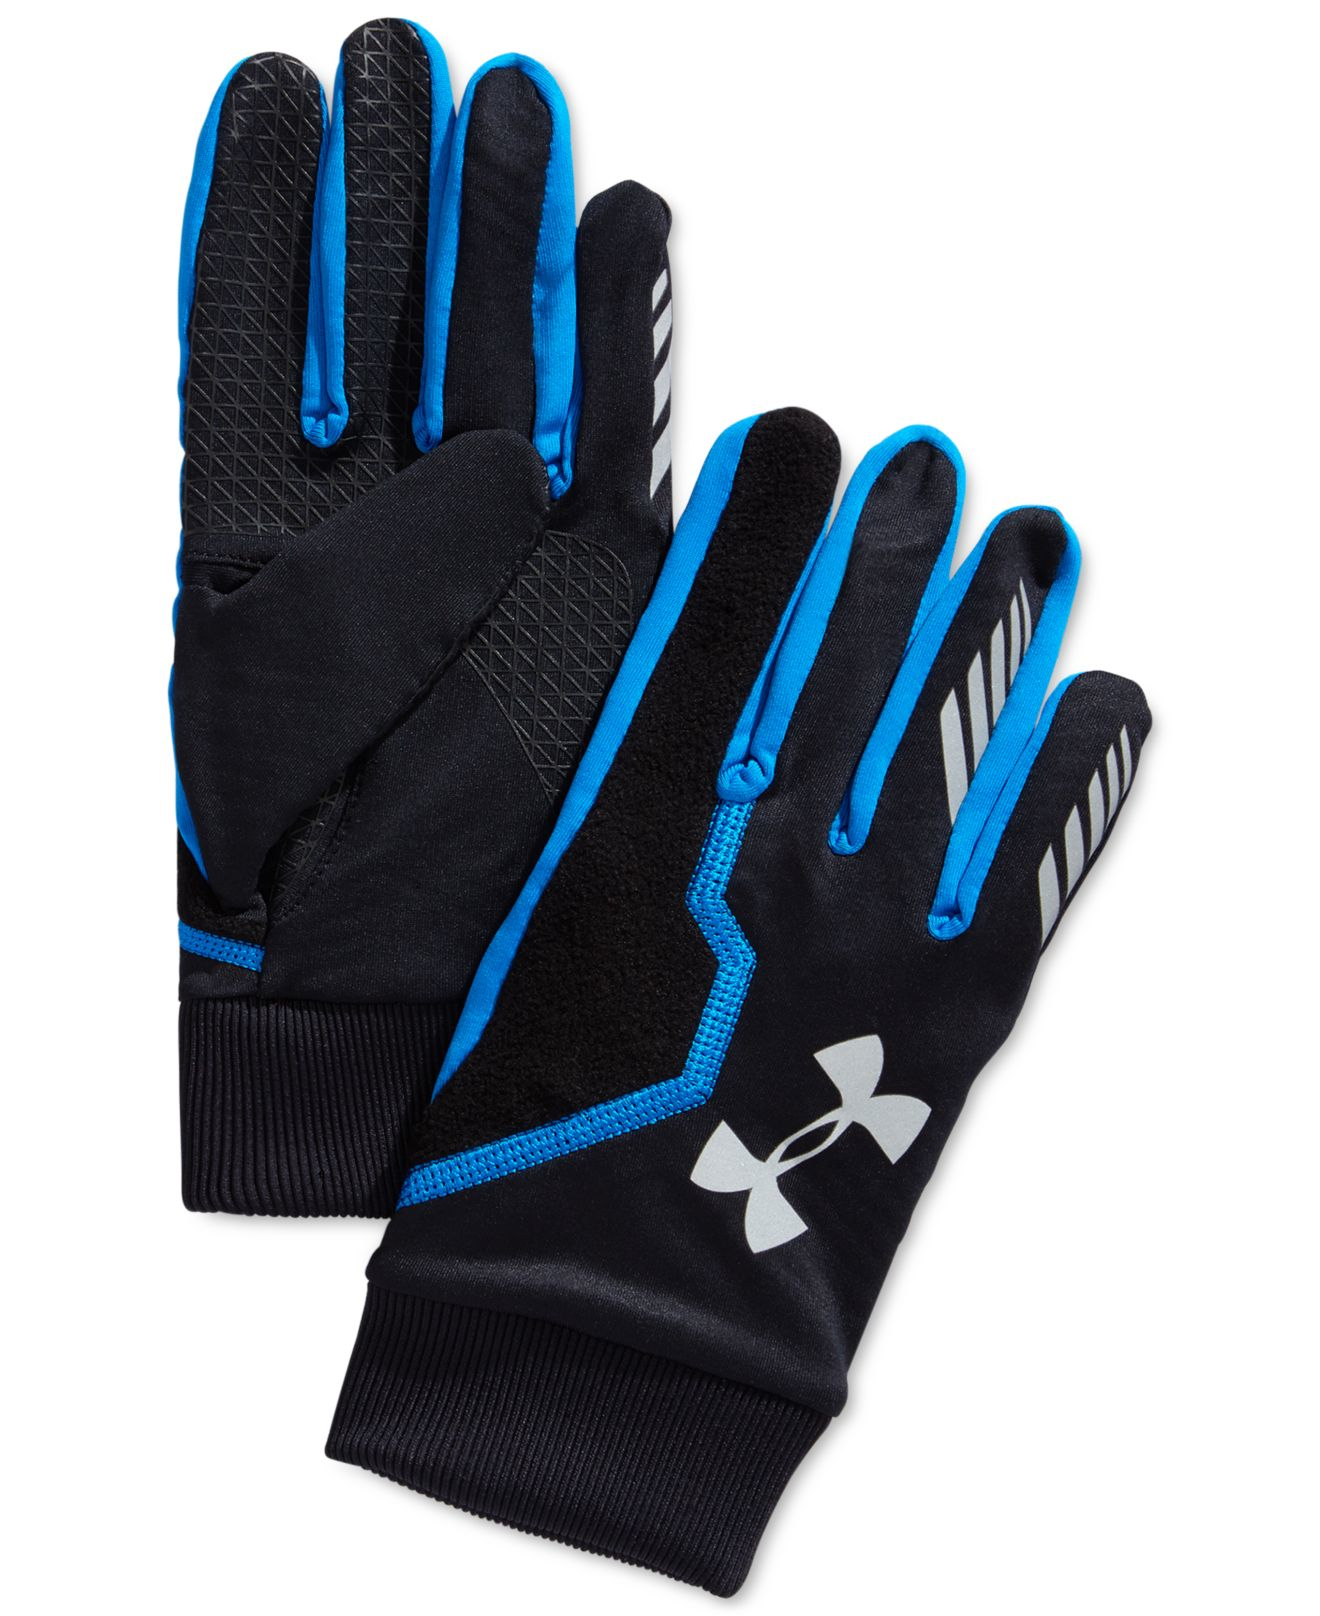 Under Armour Coldgear Infrared Gloves, Buy Now, Factory Sale, 51% OFF,  www.acananortheast.com